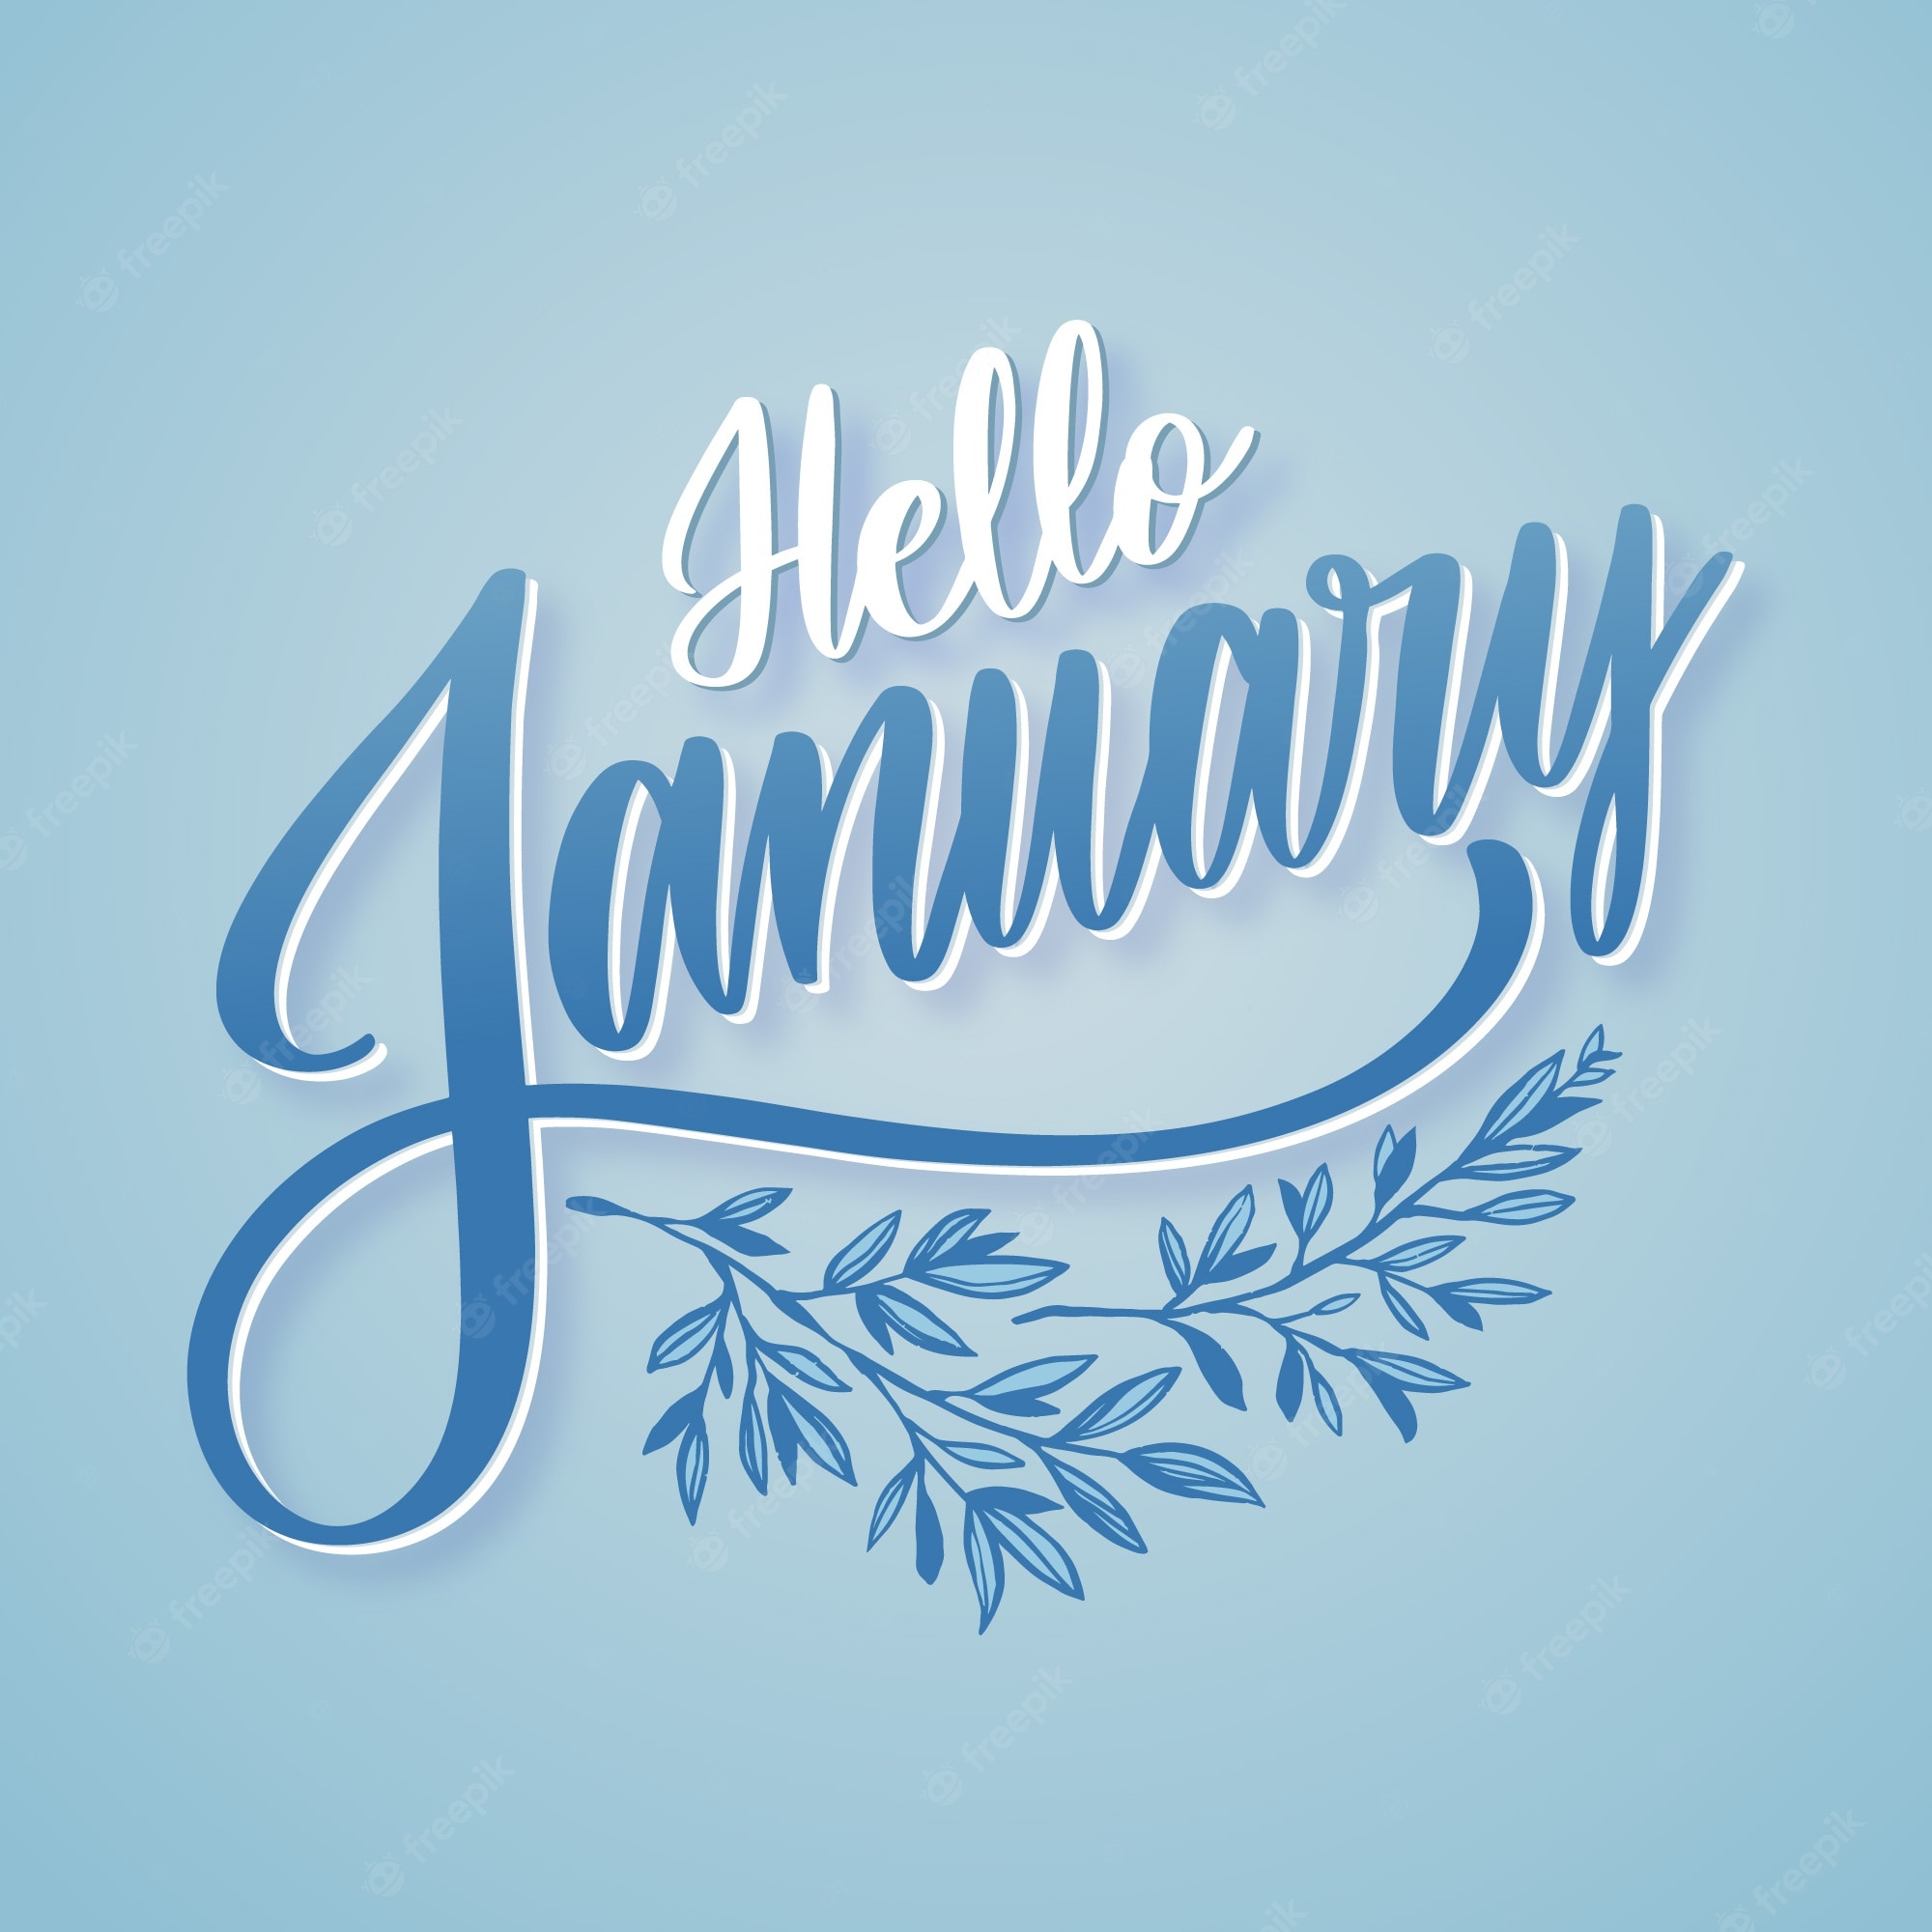 Hello january Vectors & Illustrations for Free Download